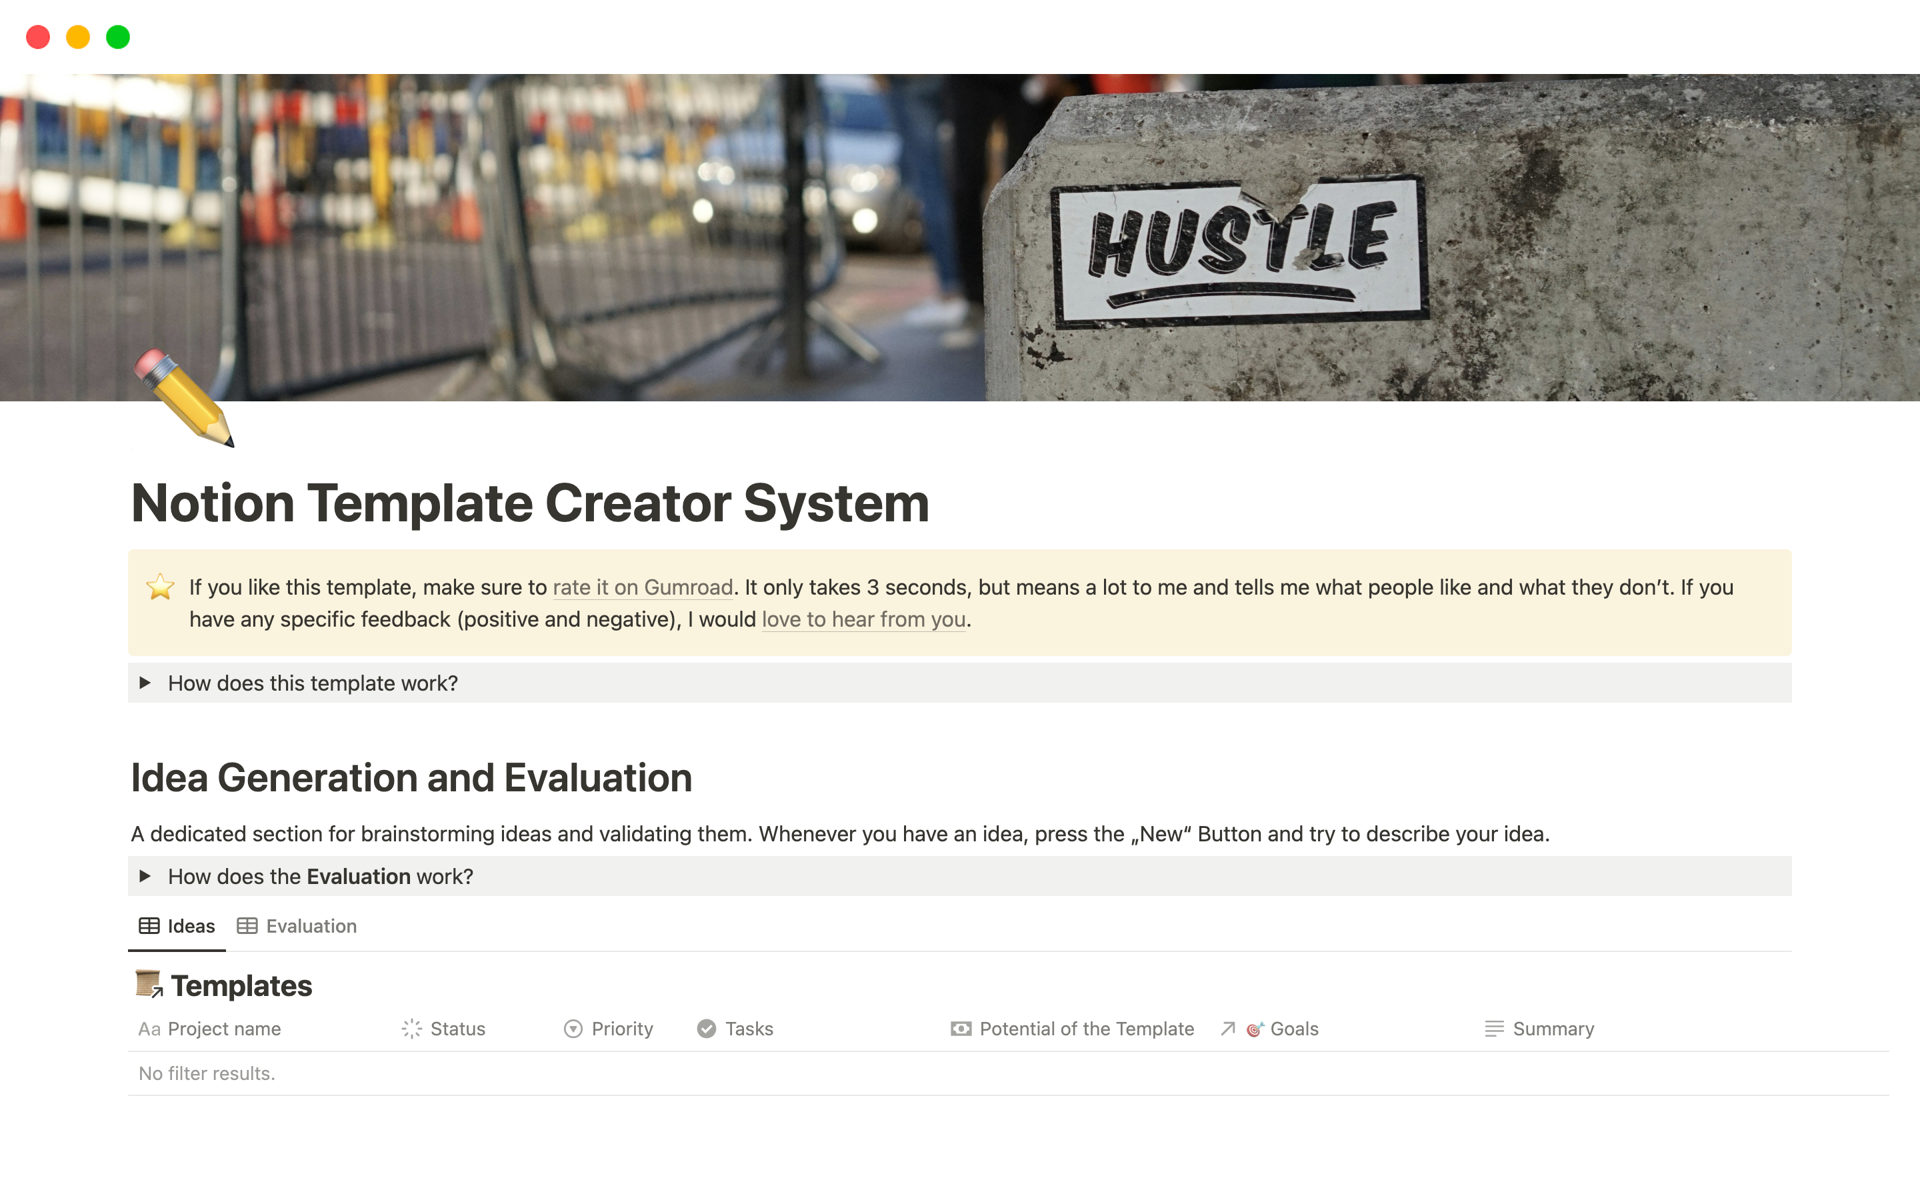 The Notion Template Creator System empowers you to effectively ideate, develop, test, and monetize custom Notion templates, providing a comprehensive workspace for project tracking, user feedback analysis, marketing strategy, and revenue optimization.